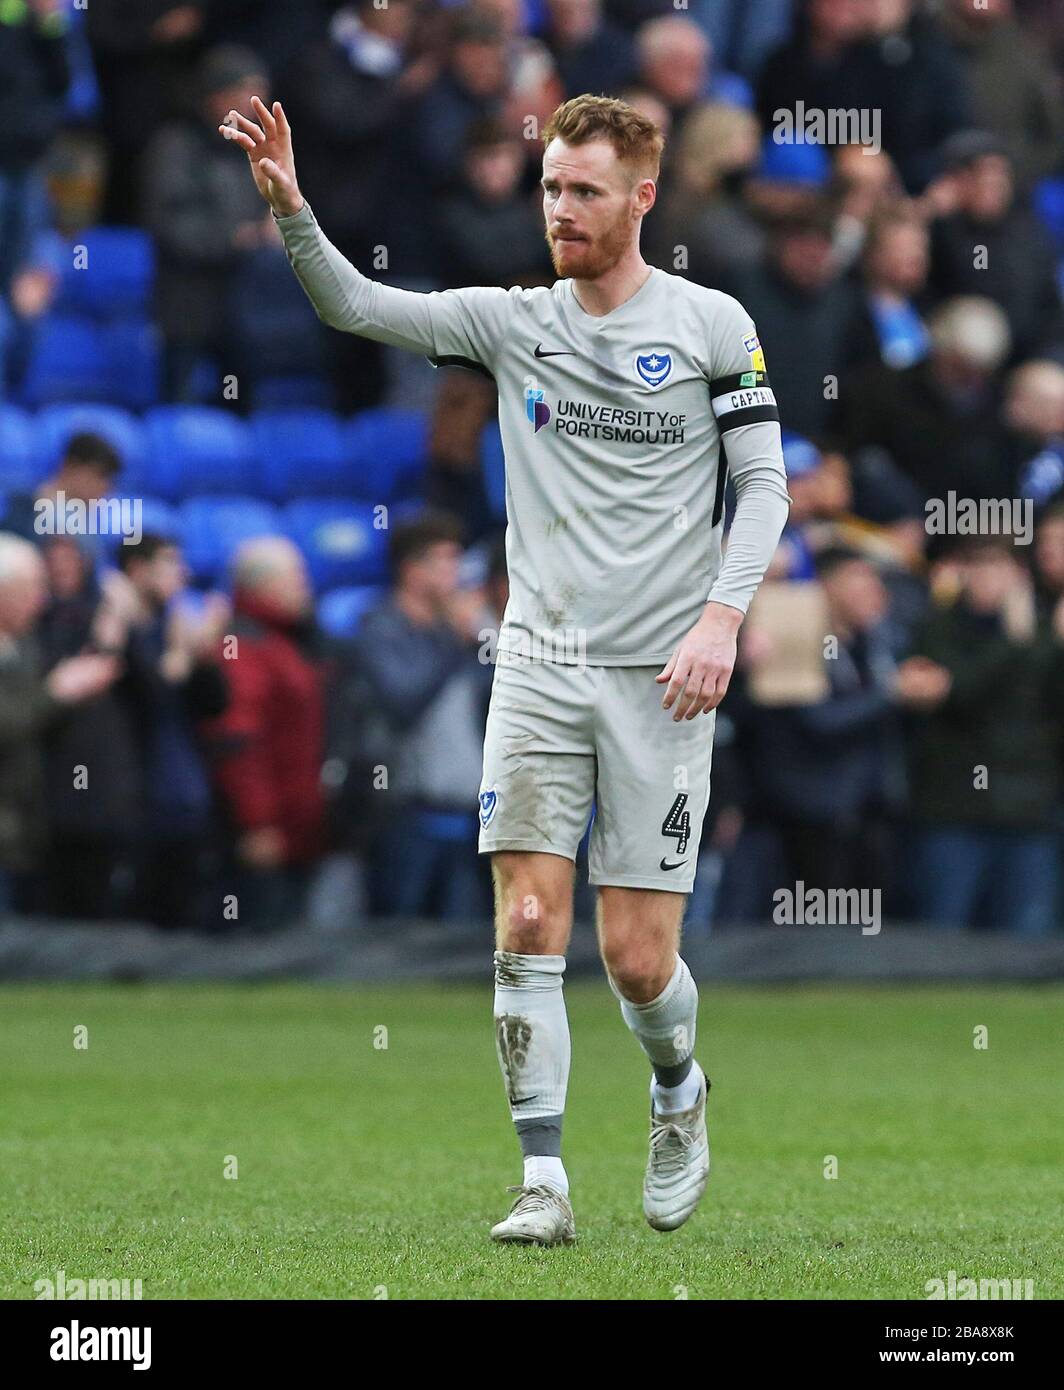 Portsmouth's Tom Naylor waves to the Portsmouth fans after the final whistle Stock Photo